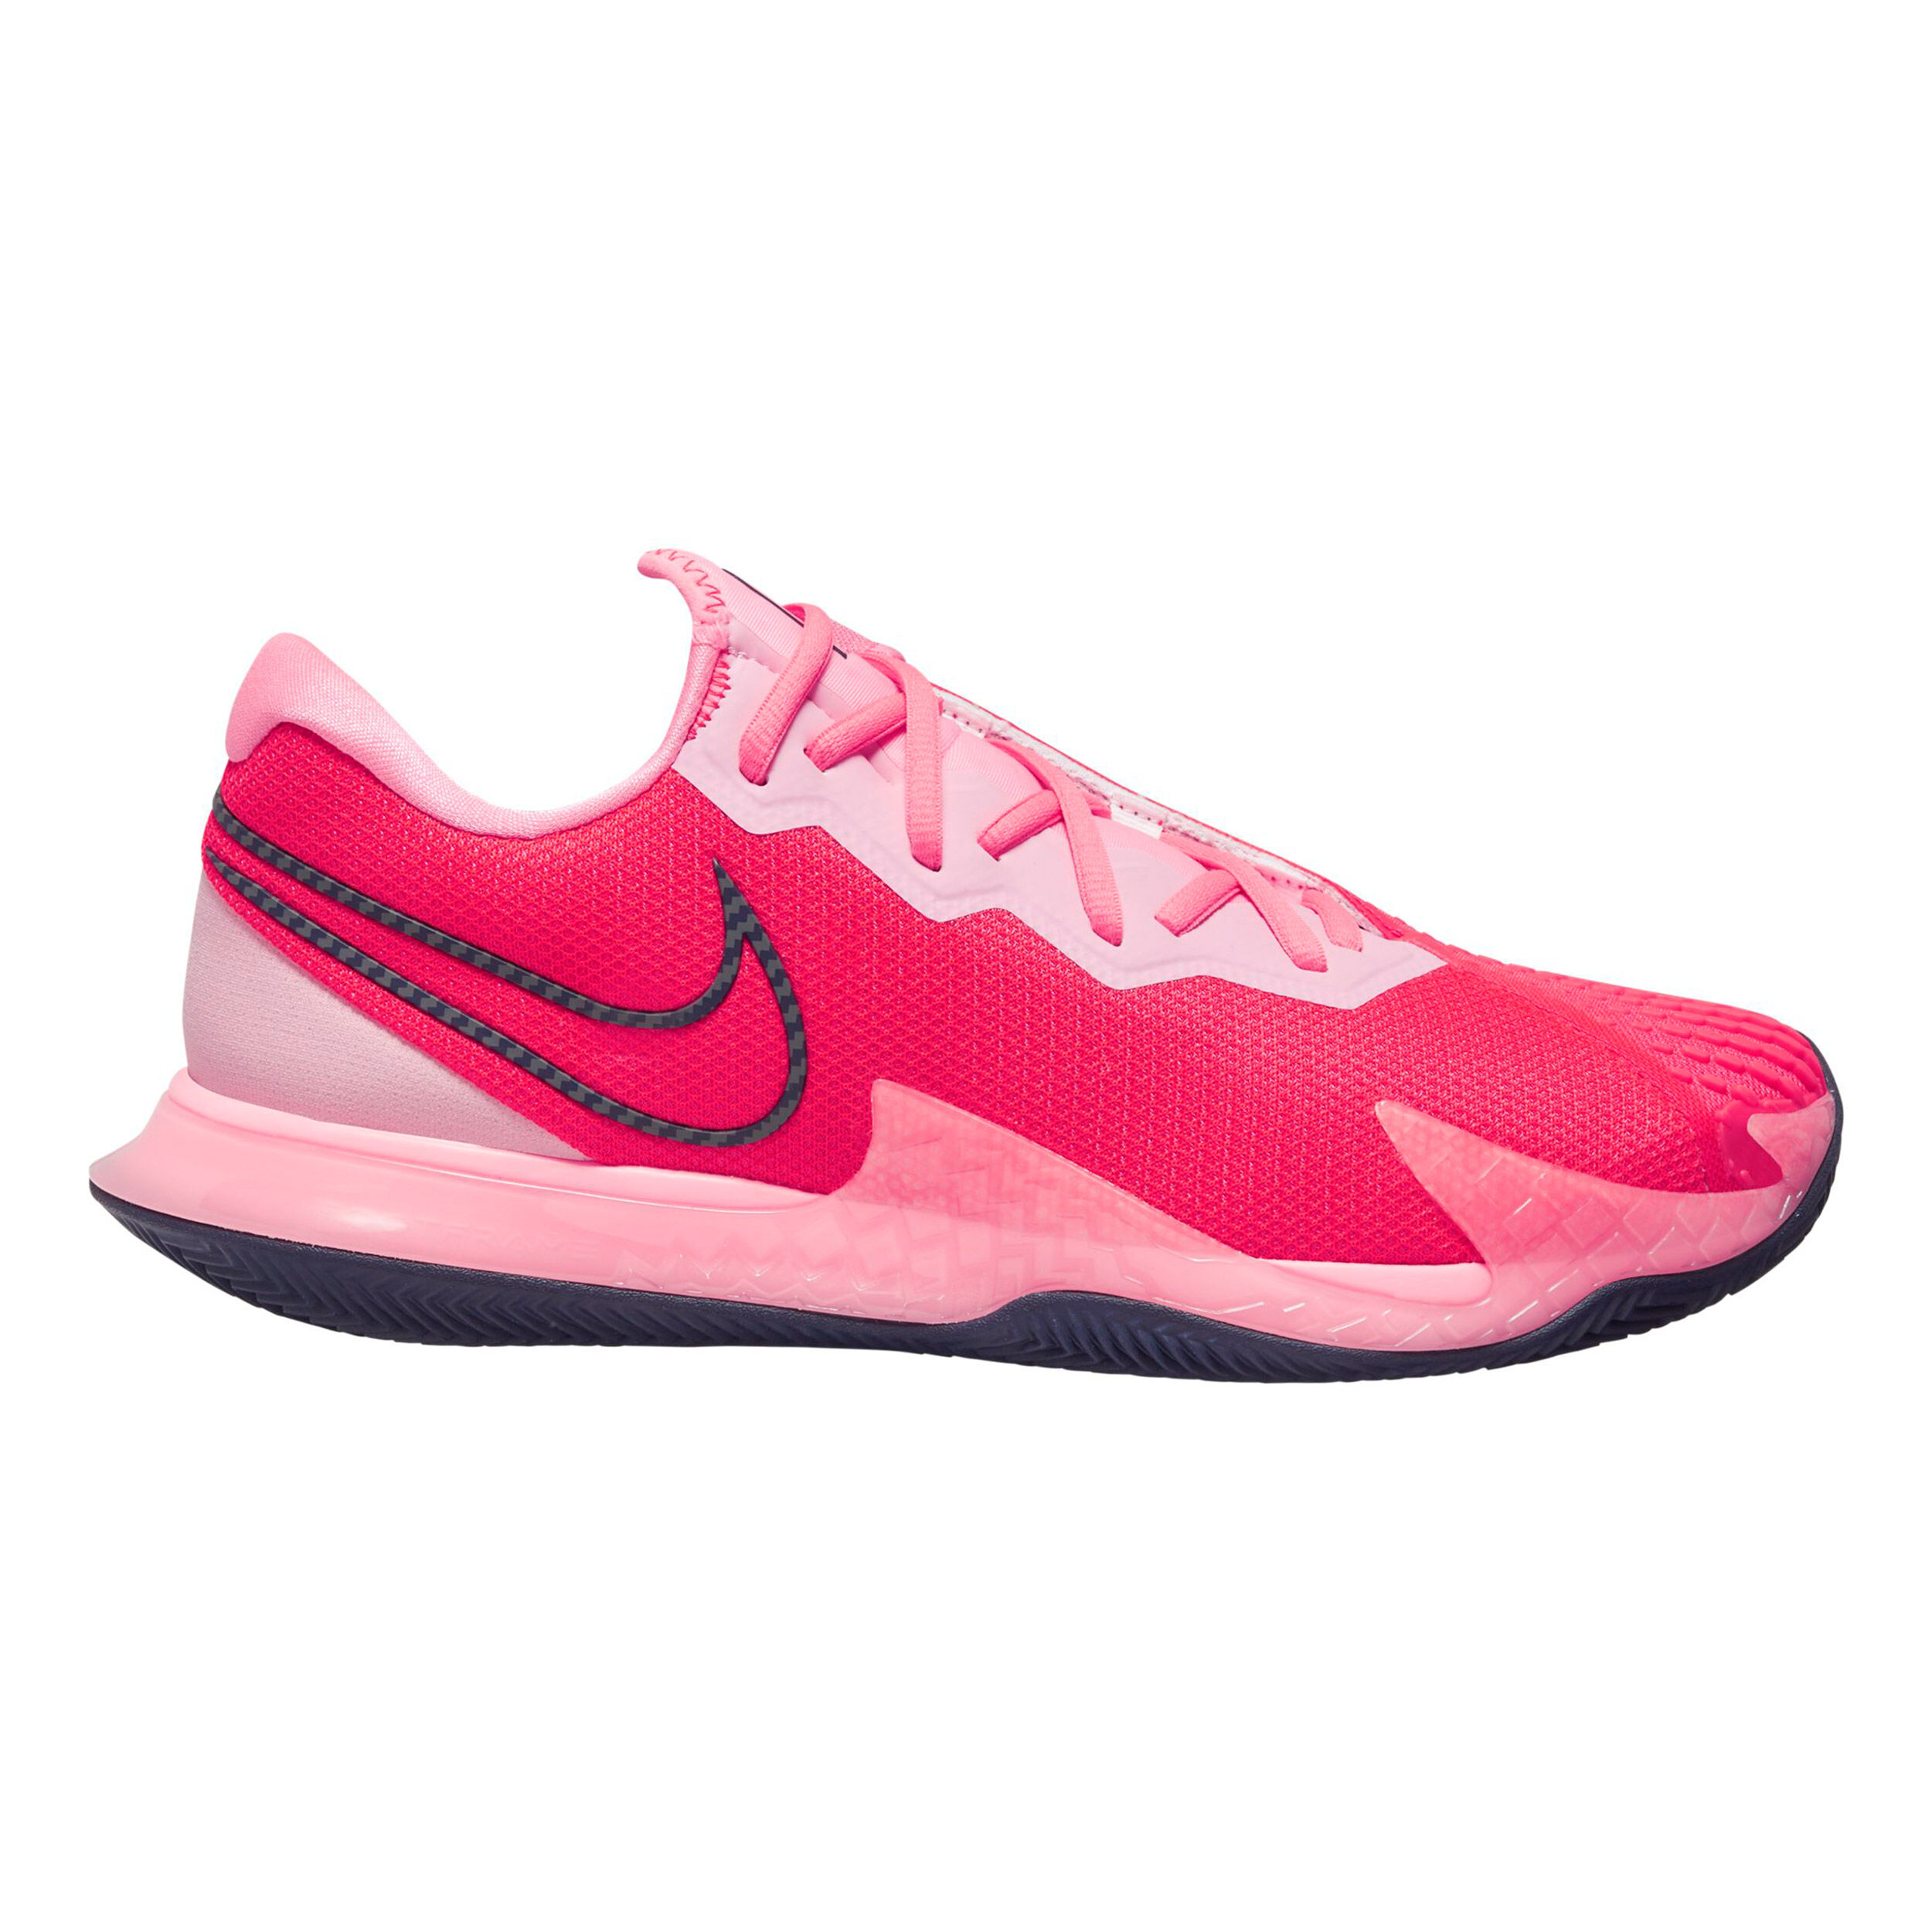 Air Zoom Vapor Cage 4 Clay Court Shoe Women - Neon Red, Pink